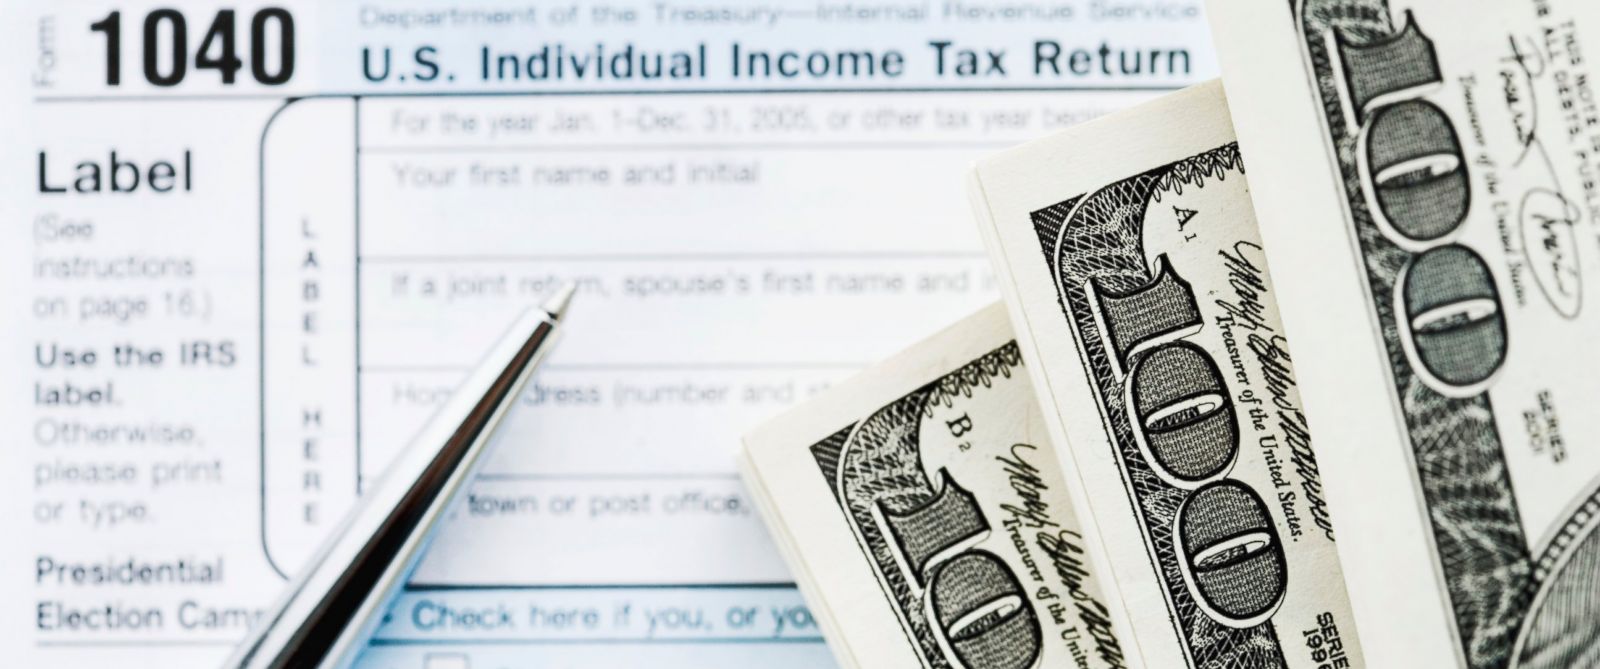 How can you get a quicker income tax refund from the IRS?